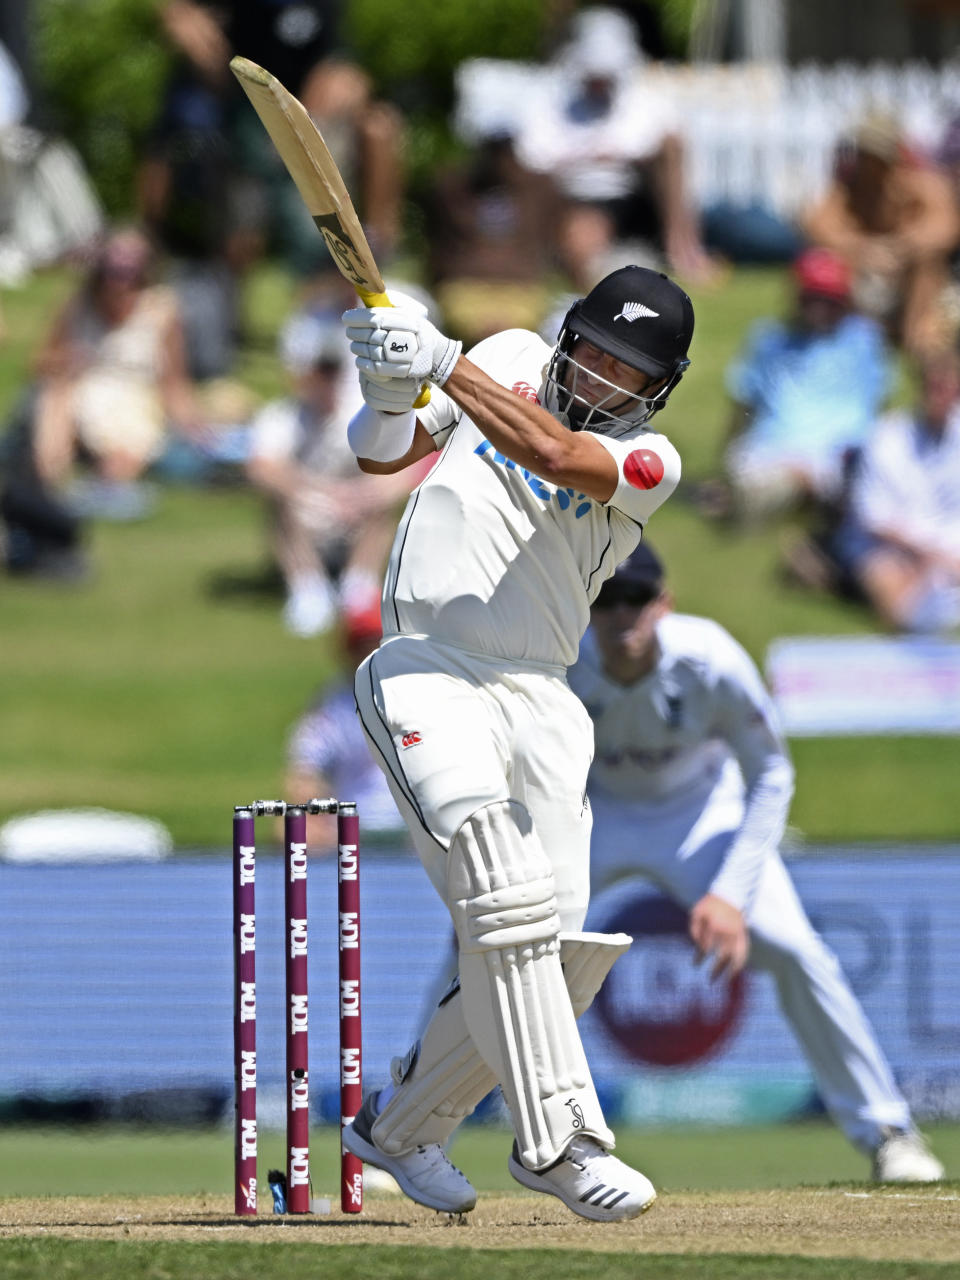 New Zealand's Neil Wagner bats against England on the second day of their cricket test match in Tauranga, New Zealand, Friday, Feb. 17, 2023. (Andrew Cornaga/Photosport via AP)